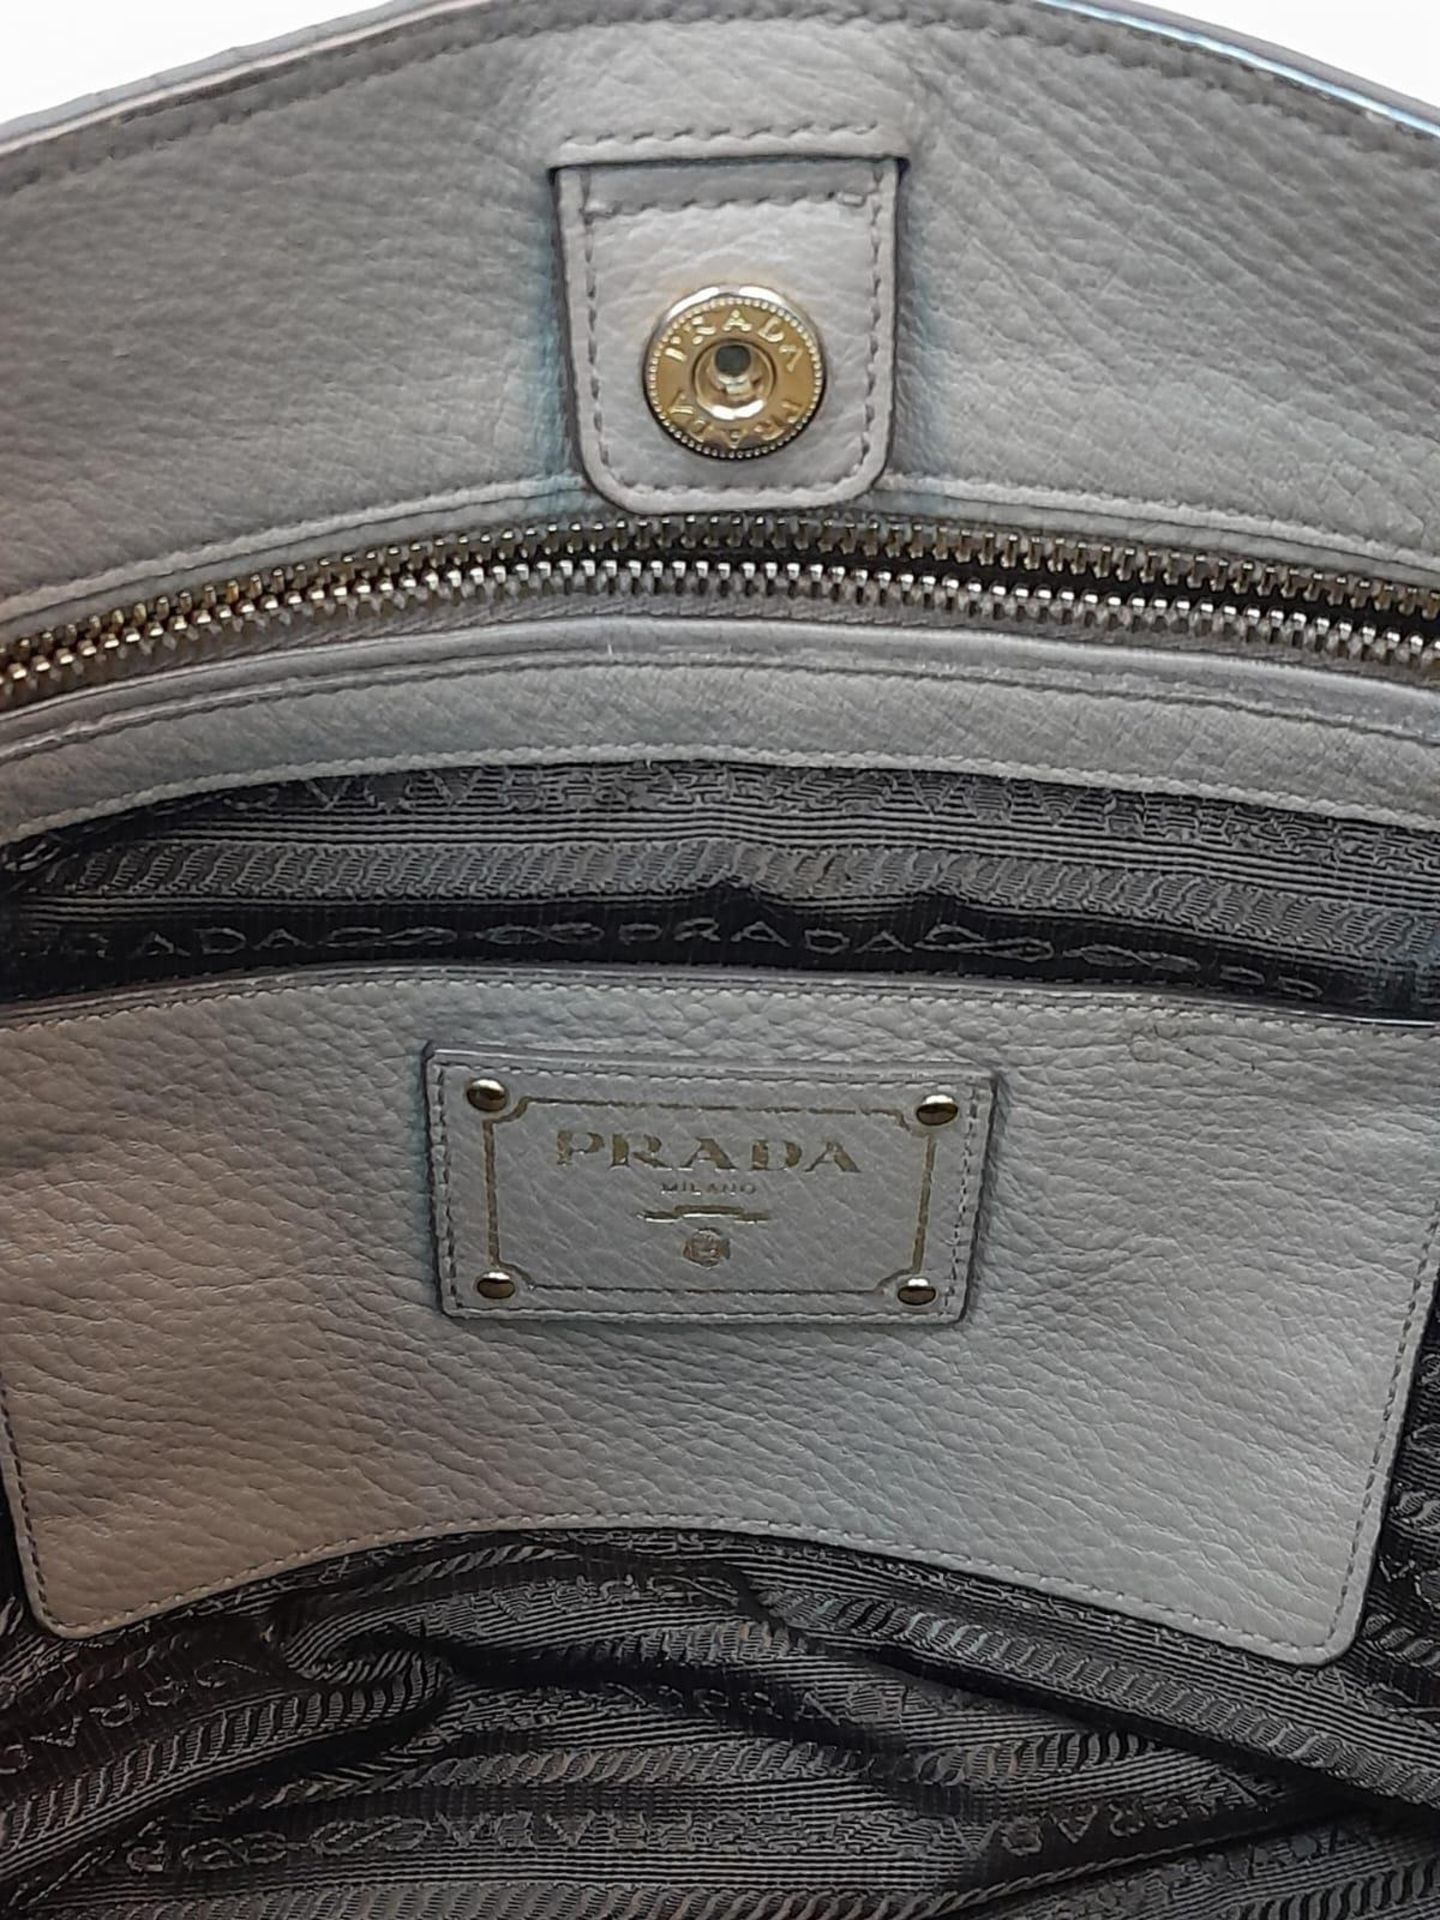 A Prada Grey Leather Shoulder Bag. Textured leather exterior with gold tone hardware. Textile and - Image 7 of 9